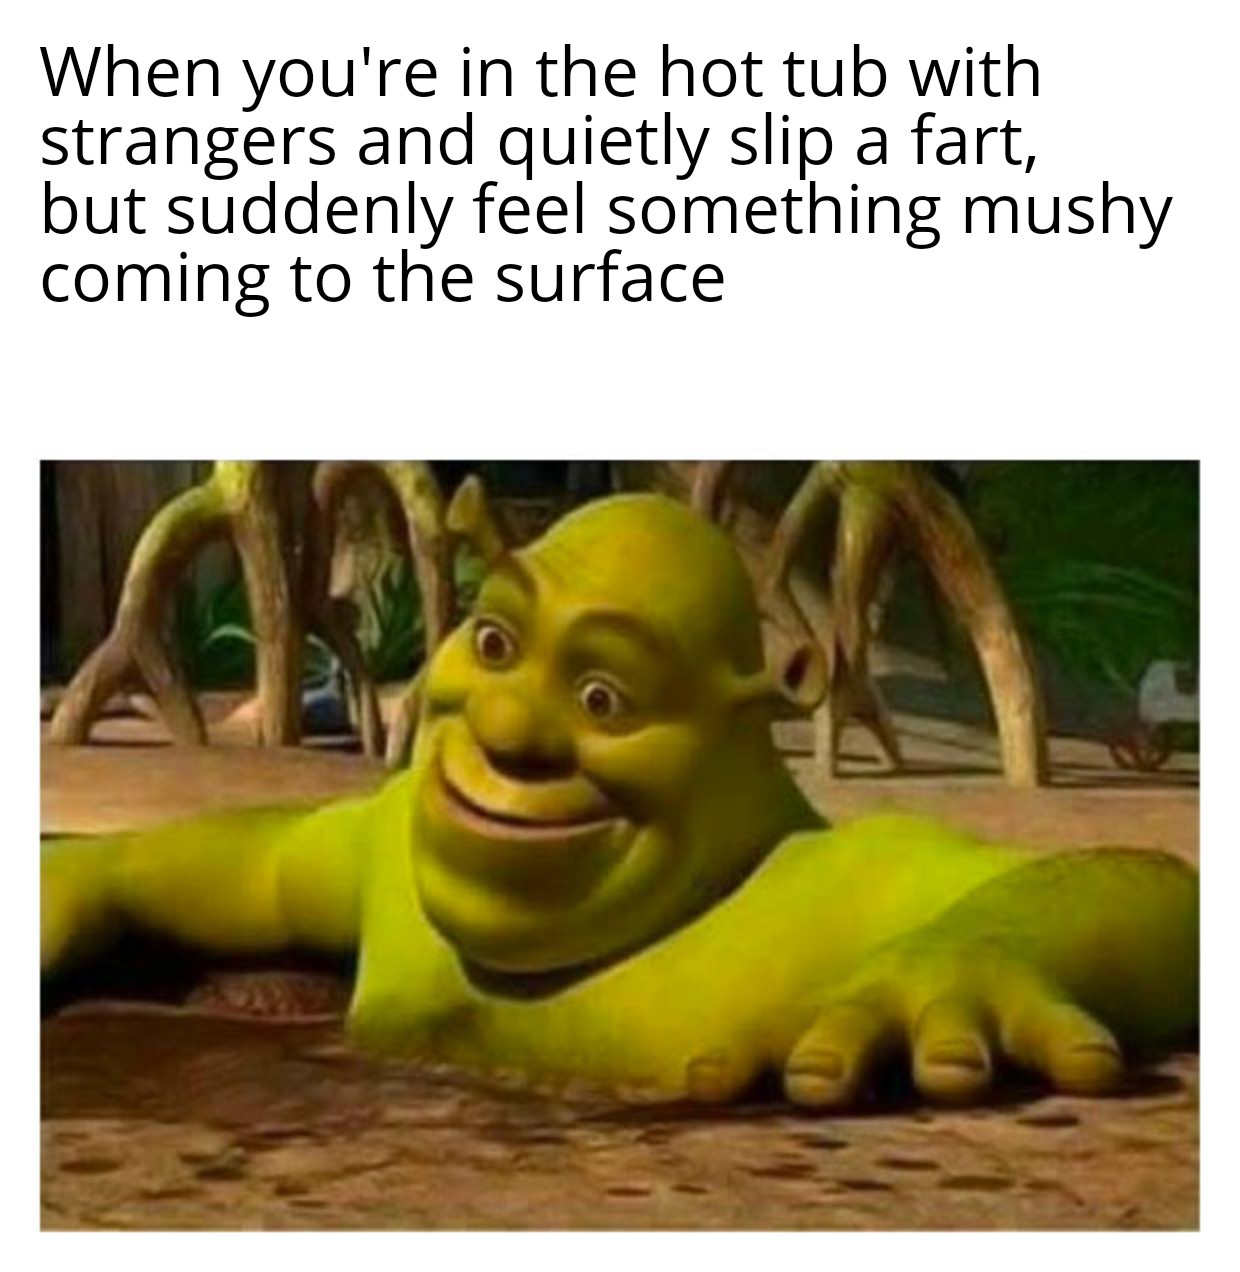 daily dose of randoms - yeah especially the backside meme - When you're in the hot tub with strangers and quietly slip a fart, but suddenly feel something mushy coming to the surface